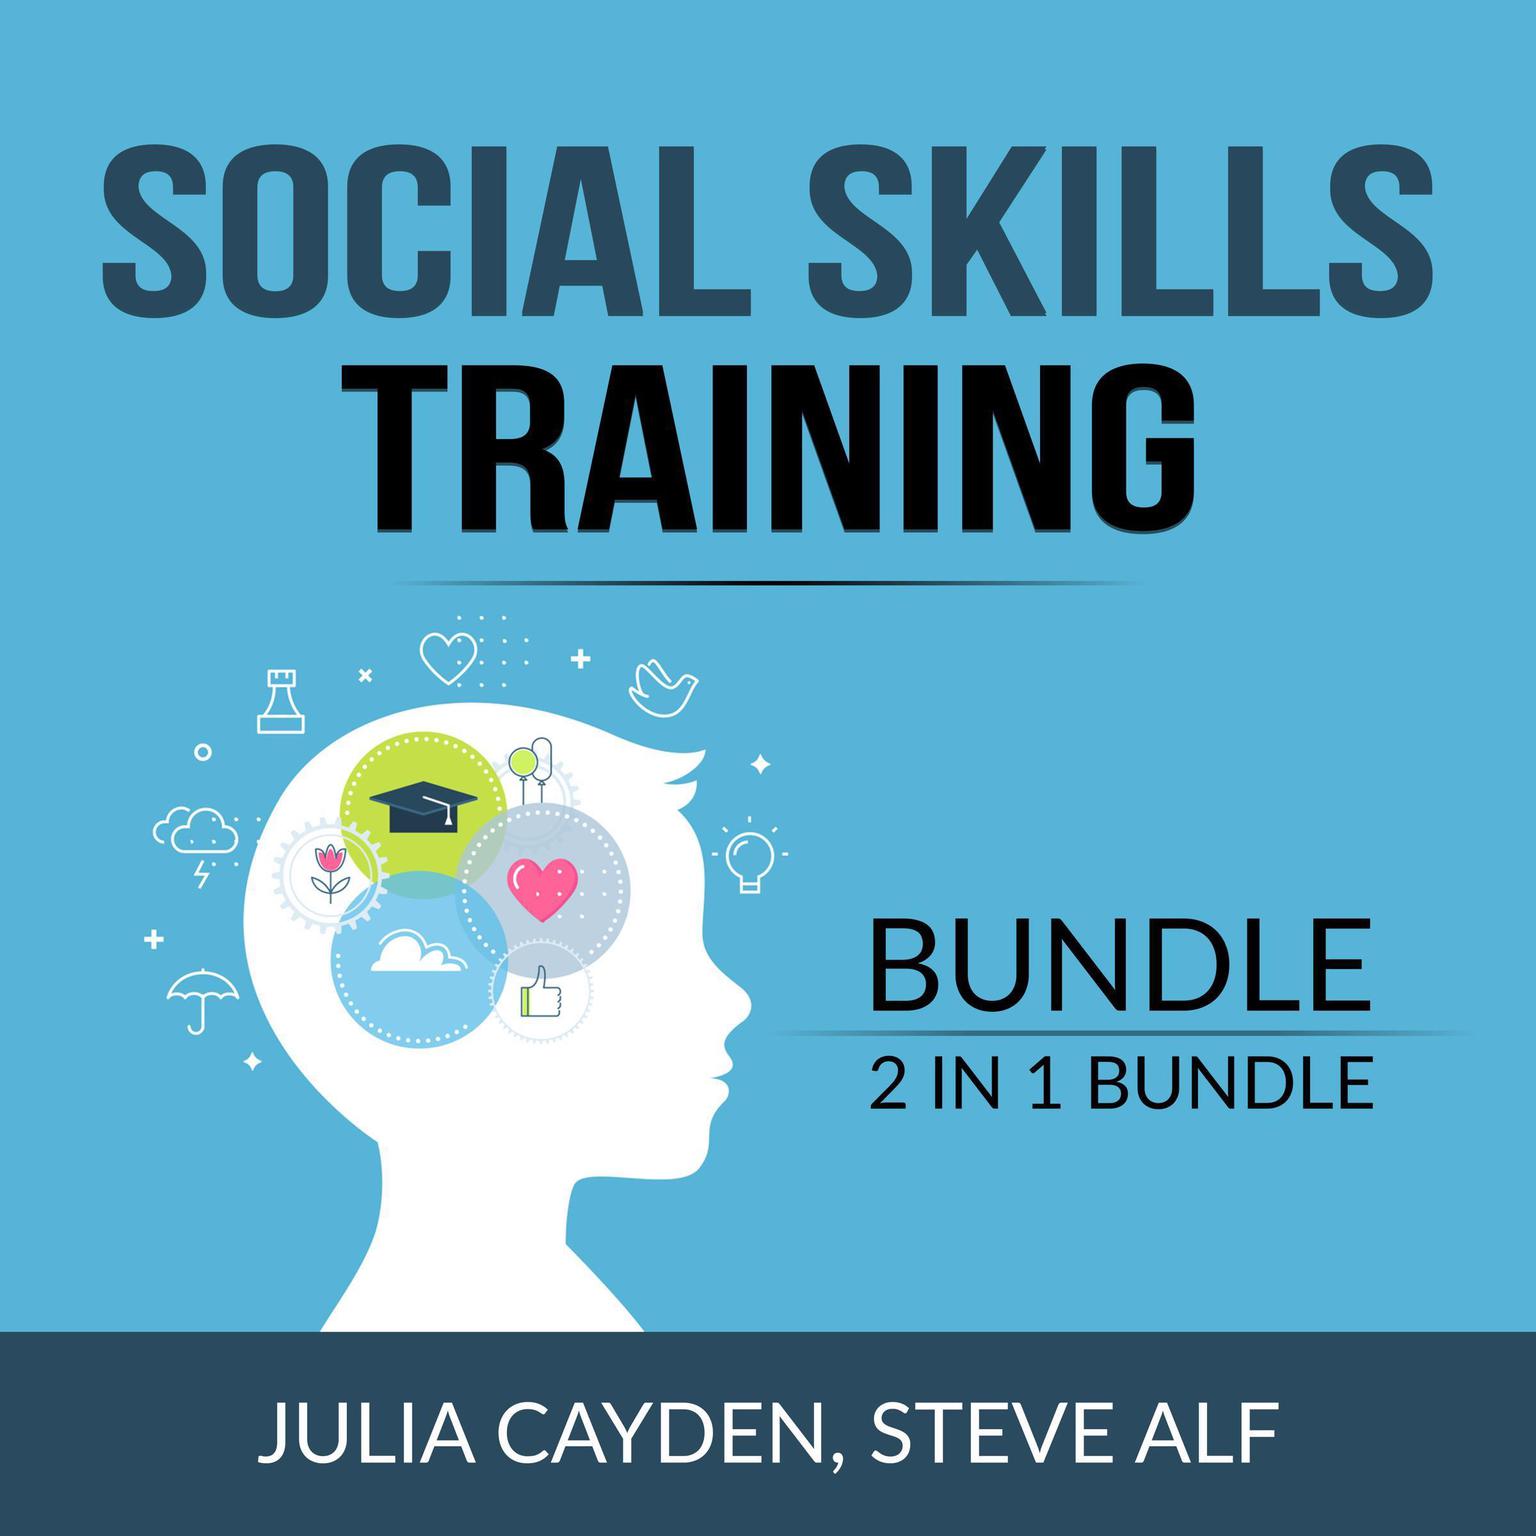 Social Skills Training Bundle, 2 in 1 Bundle: Improving Your Social & People Skills and The Science of Making Friends  Audiobook, by Julia Cayden